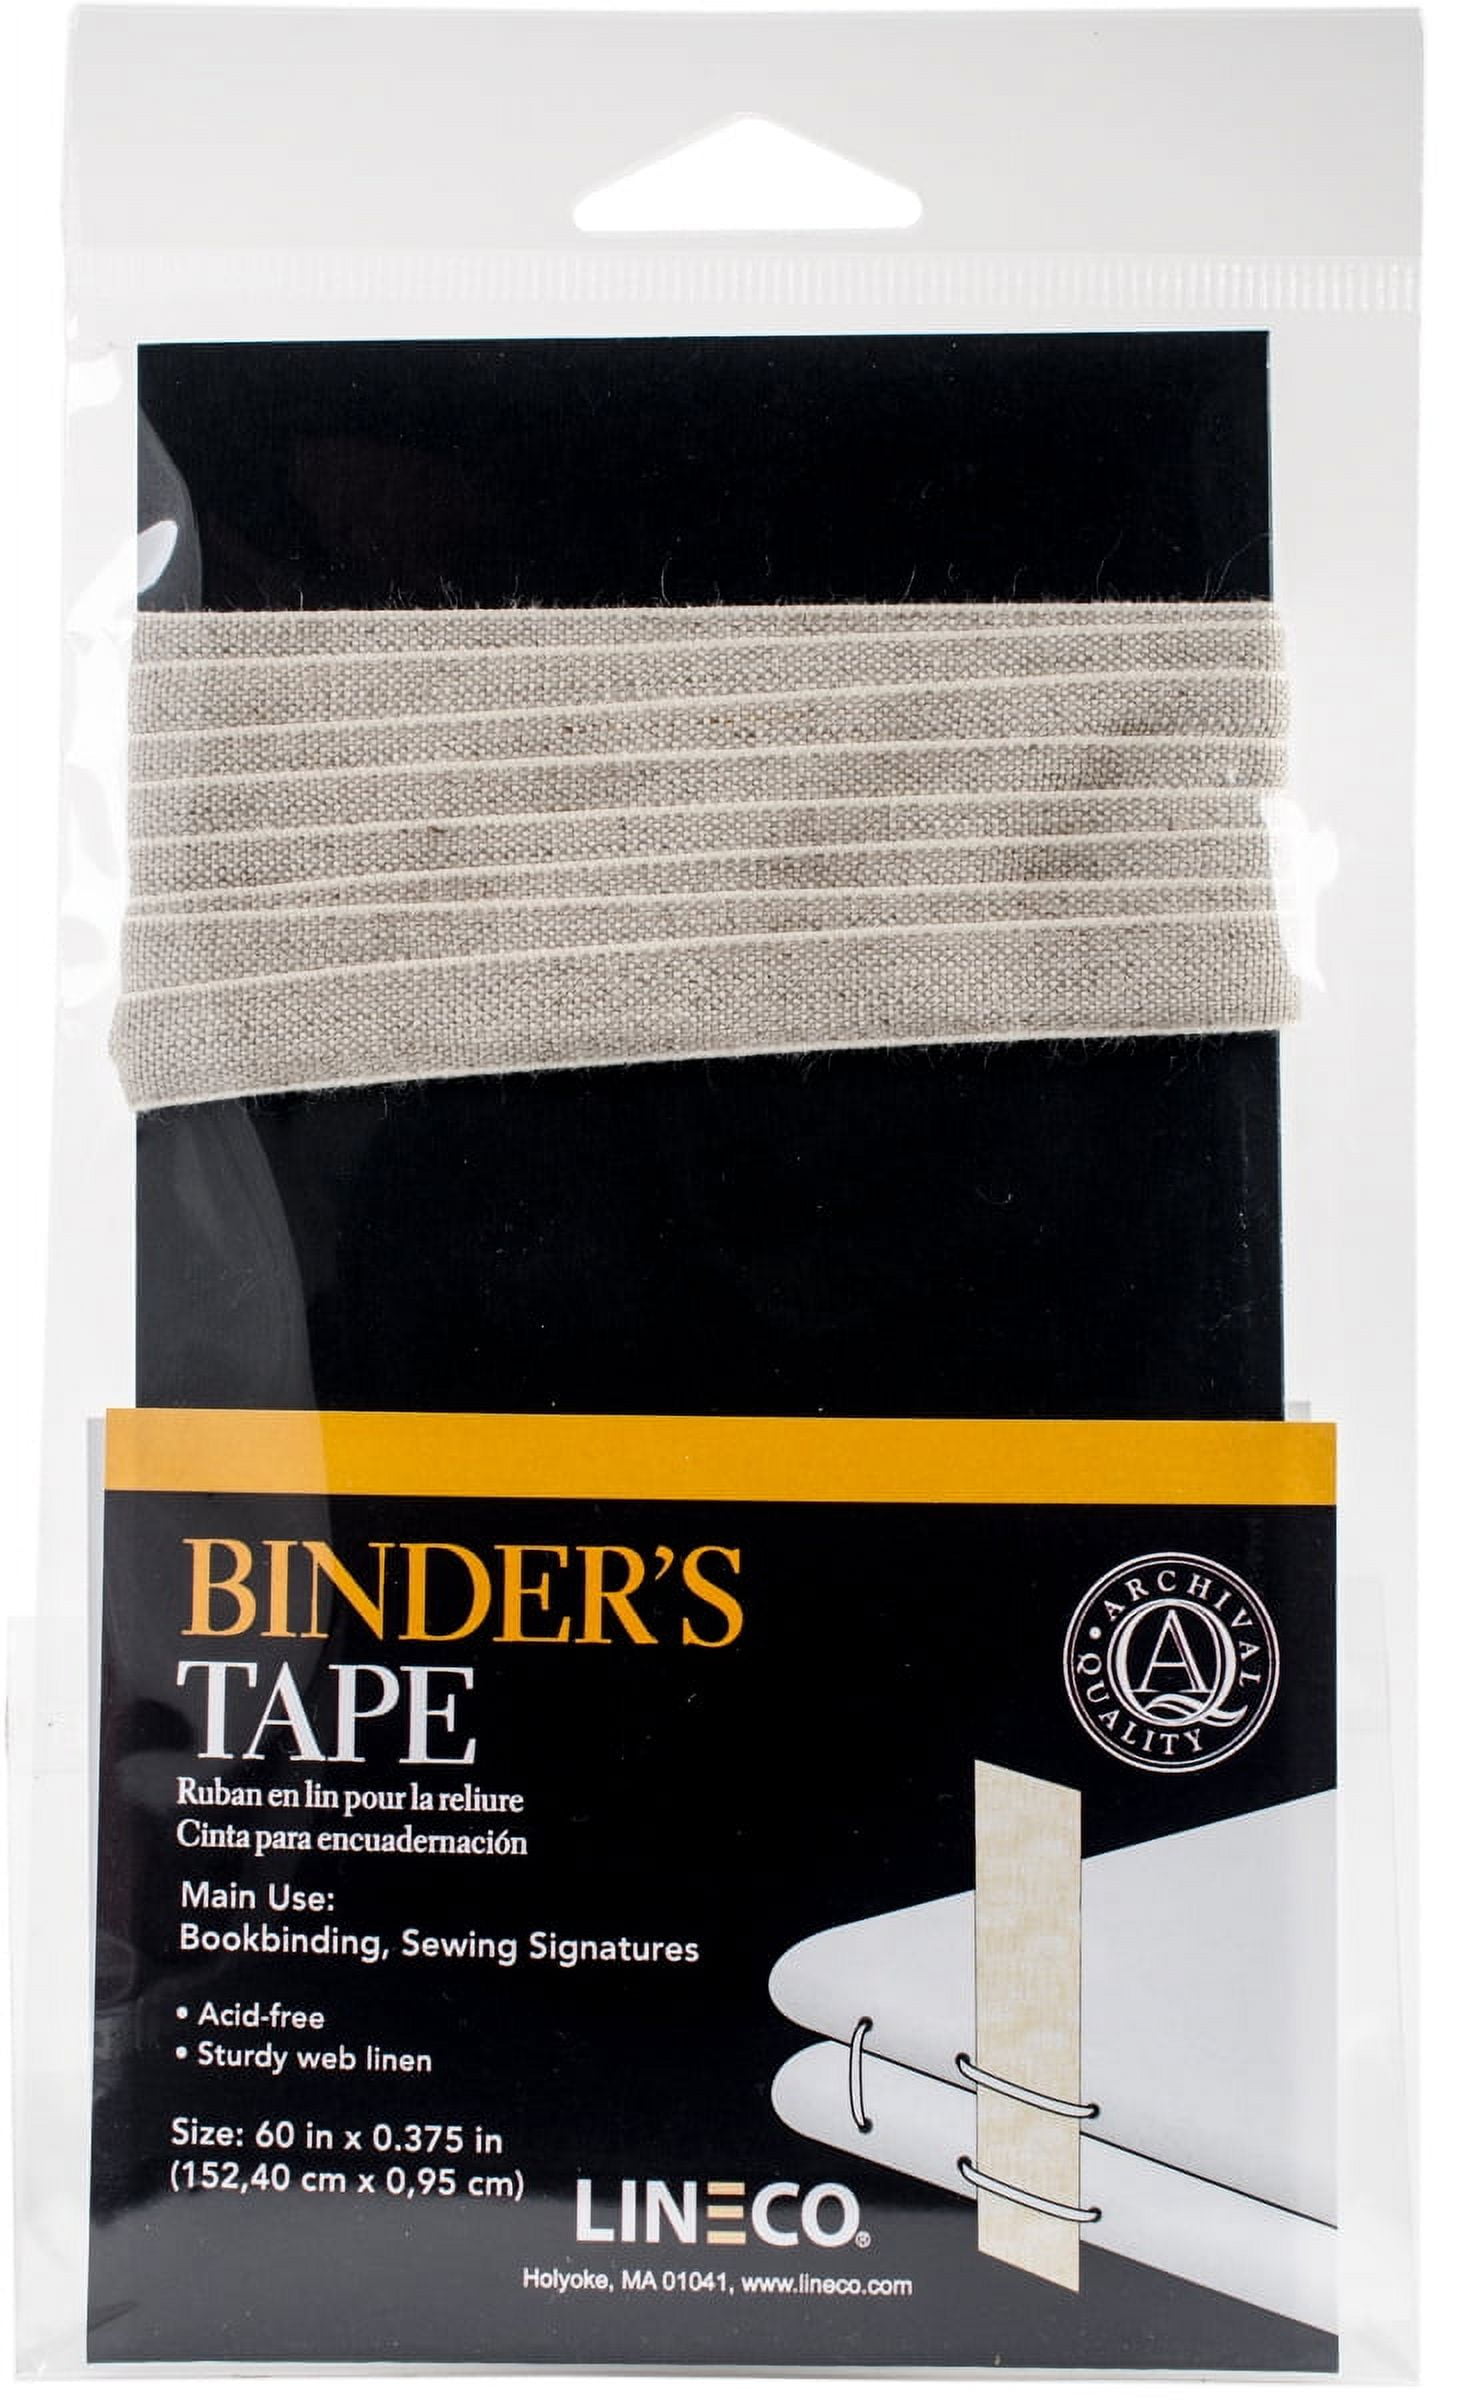 Bookbinding 101: Linen Tape - Badger and Chirp